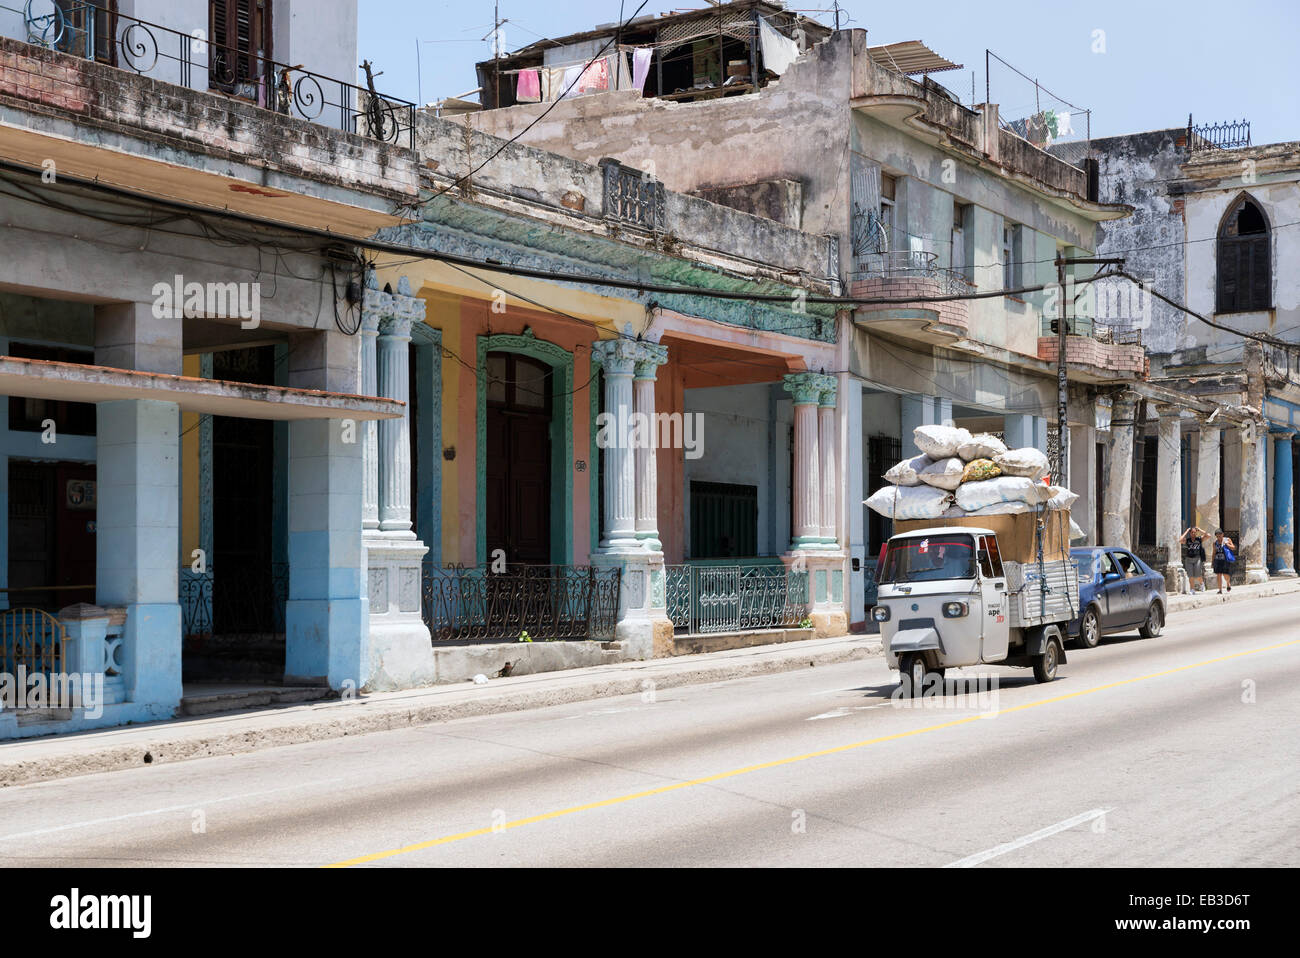 HAVANA, CUBA - MAY 5, 2014: Street scene with old van and worn out buildings. Stock Photo